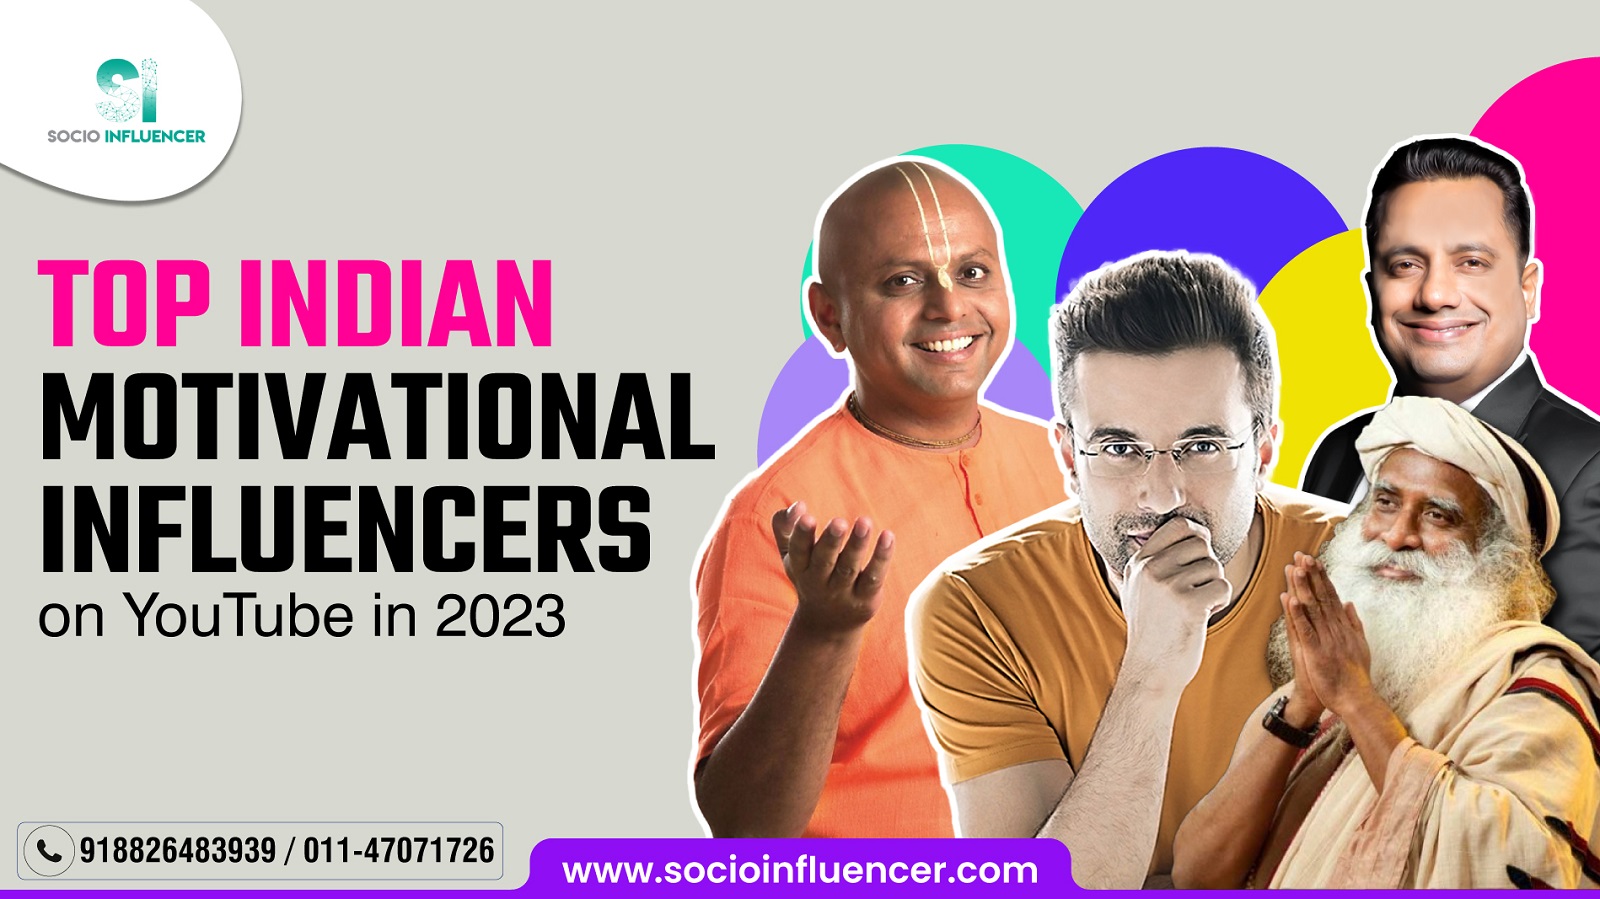 Motivational Influencers on YouTube in India